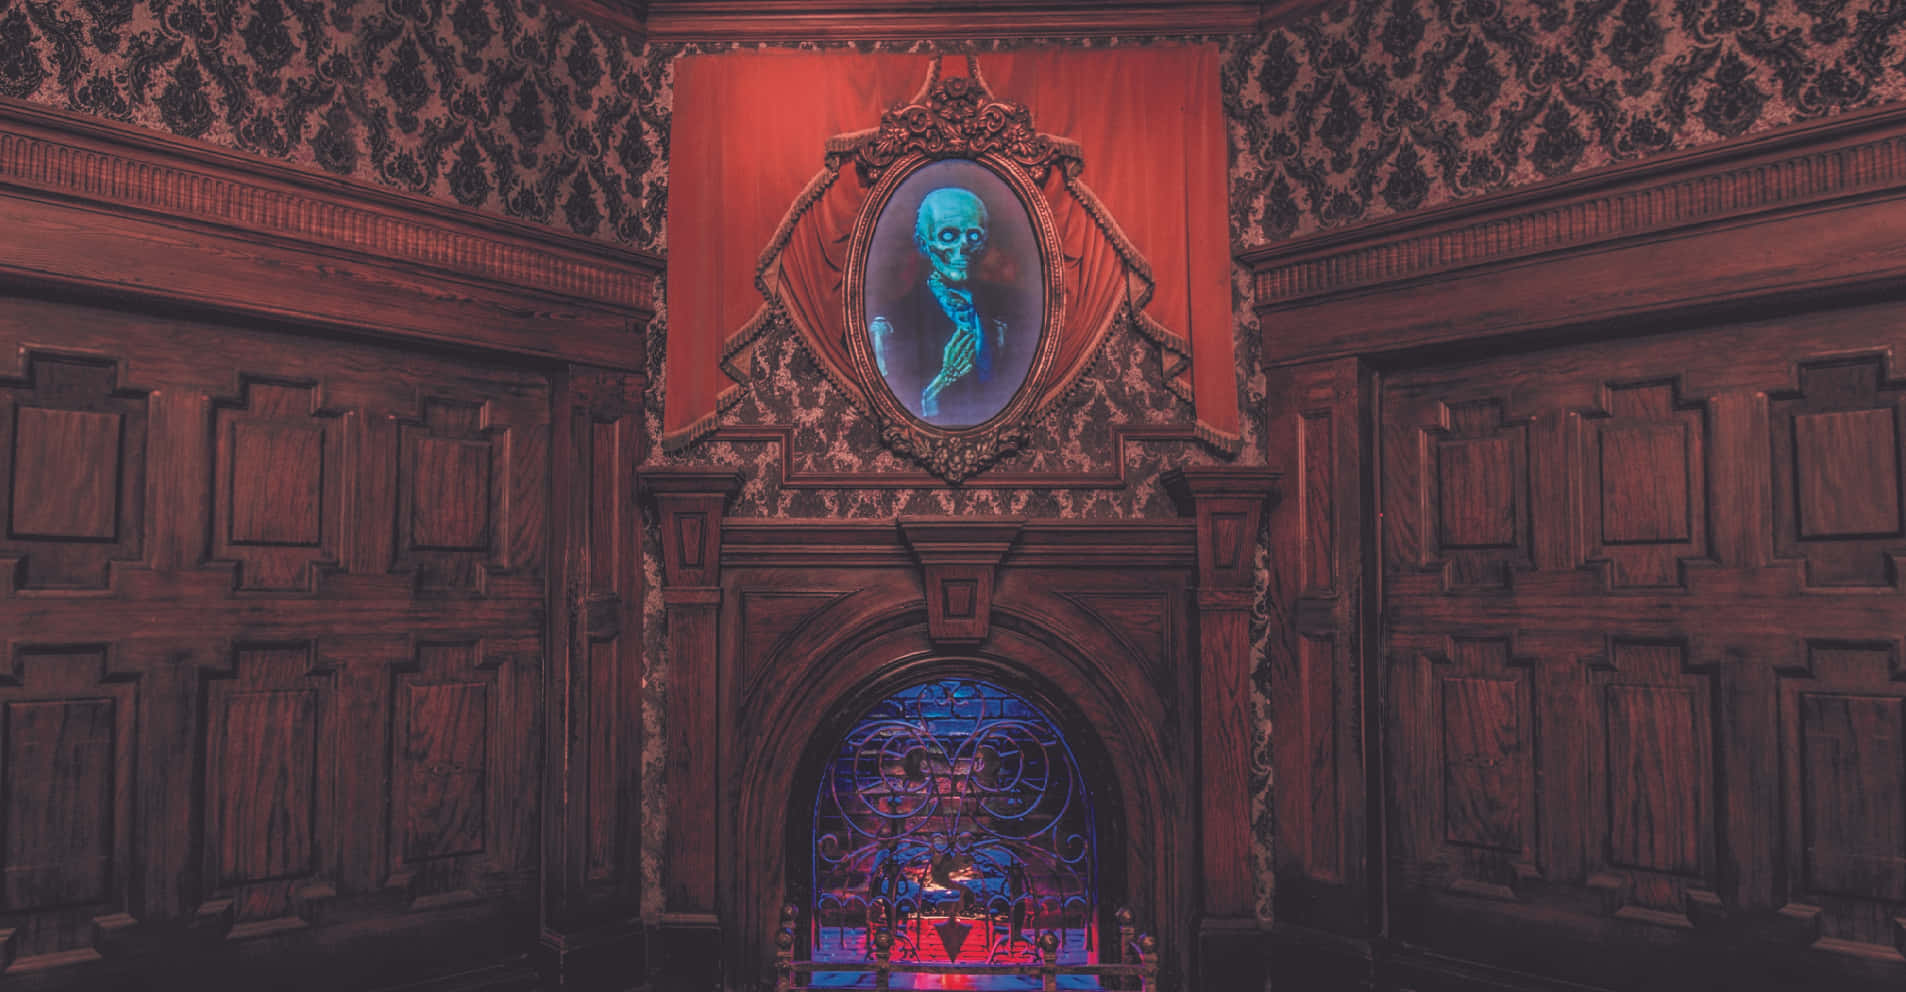 Enter the world of Haunted Mansion and explore its spooky secrets!